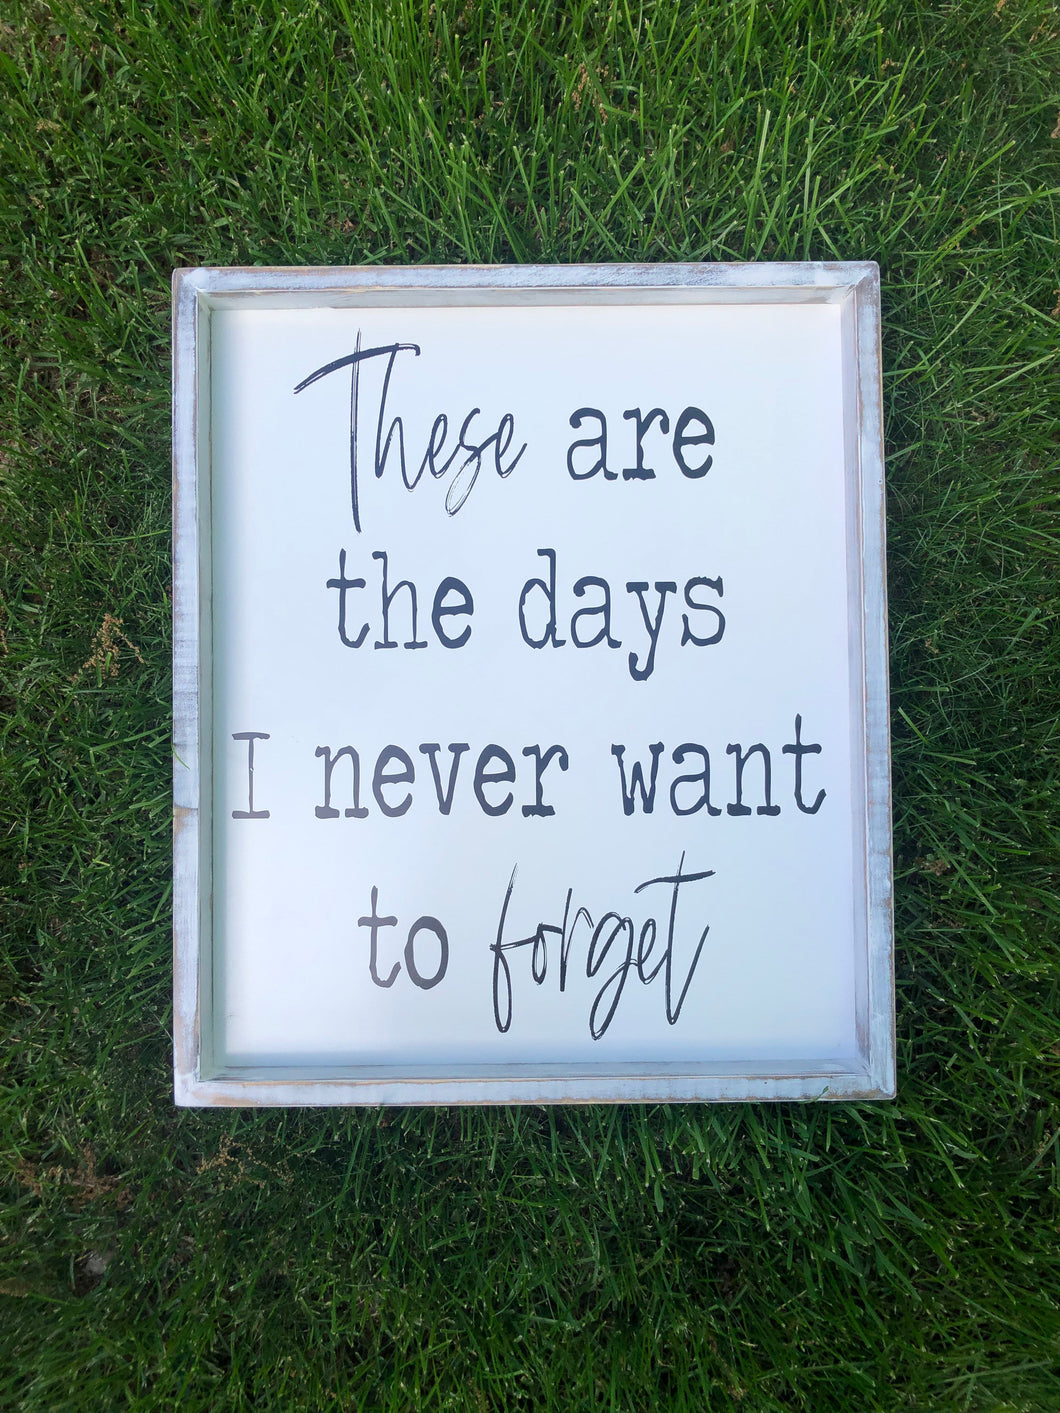 These Are The Days I Never Want To Forget Farmhouse Sign, Wooden Home Sign, Housewarming Present, Rustic Chic Decor, Wooden Quote Sign